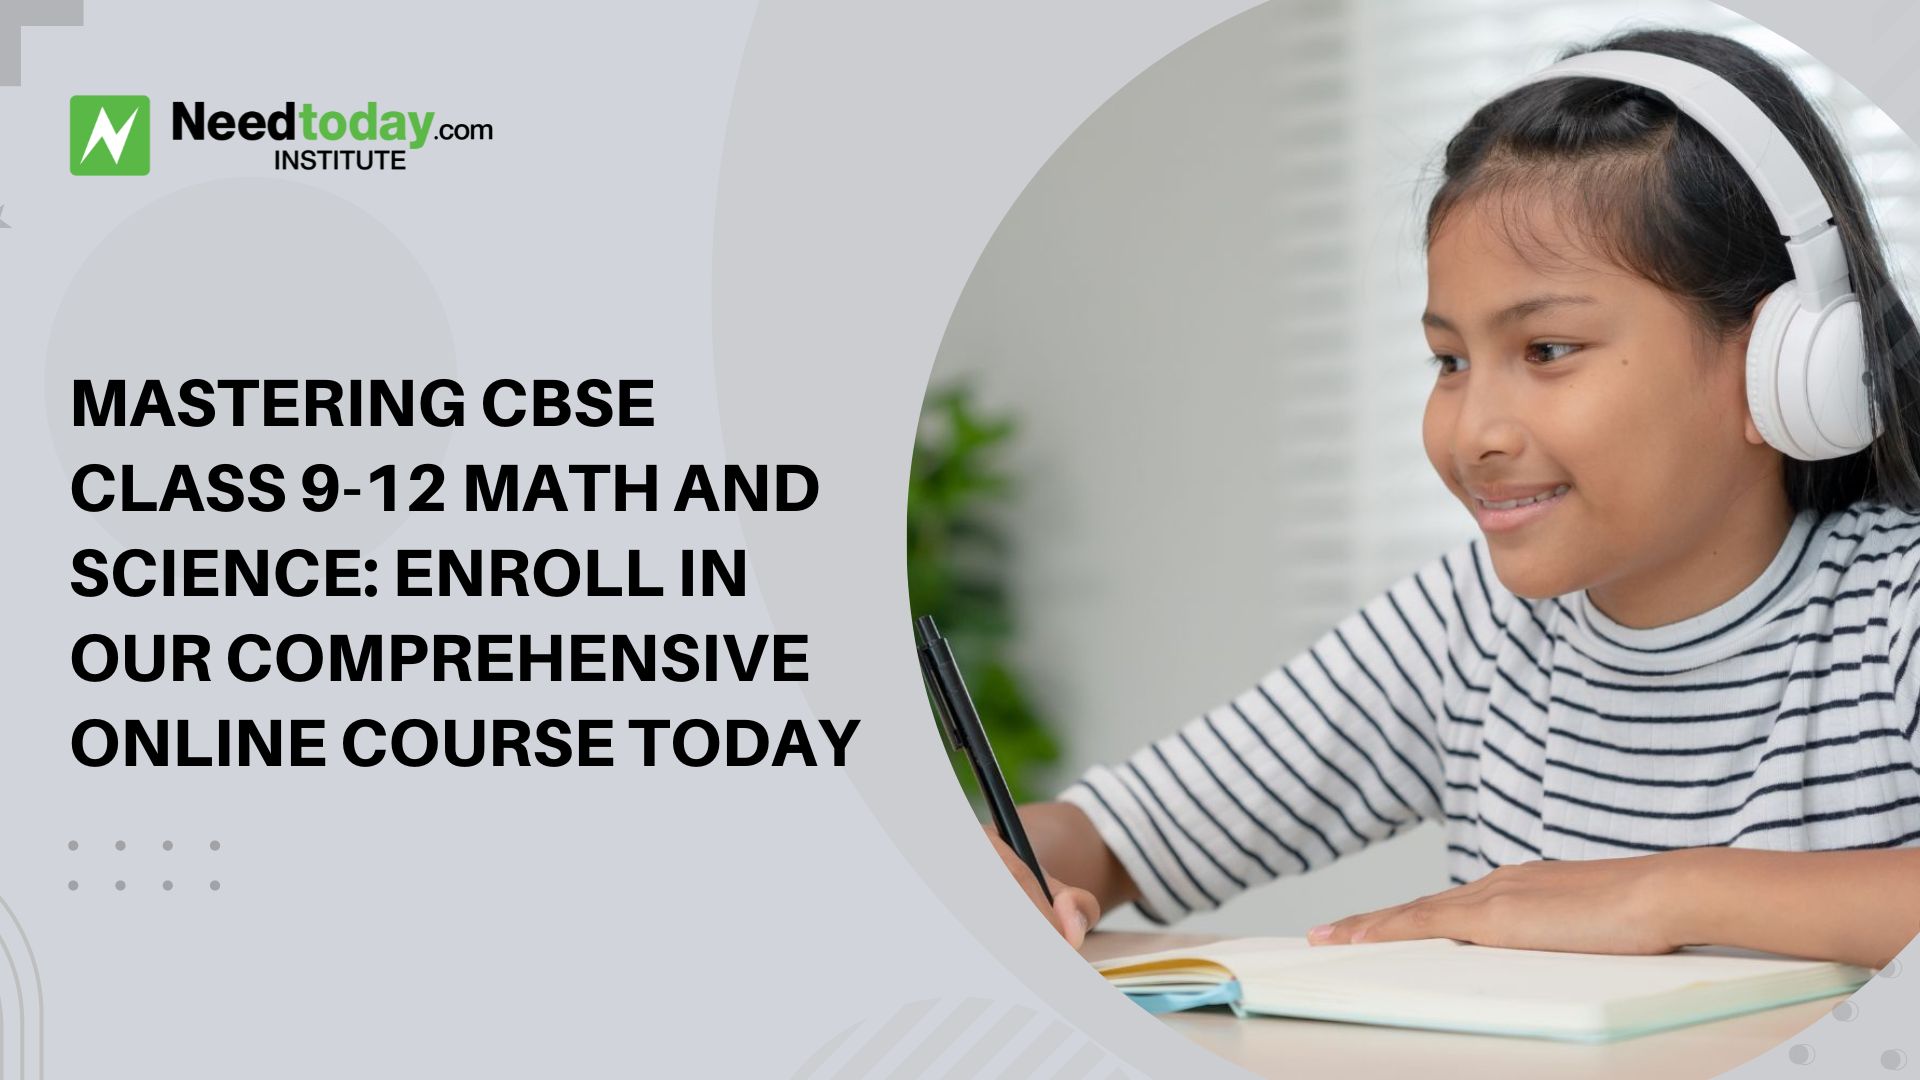 Mastering CBSE Class 9-12 Math and Science: Enroll in our Comprehensive Online Course Today